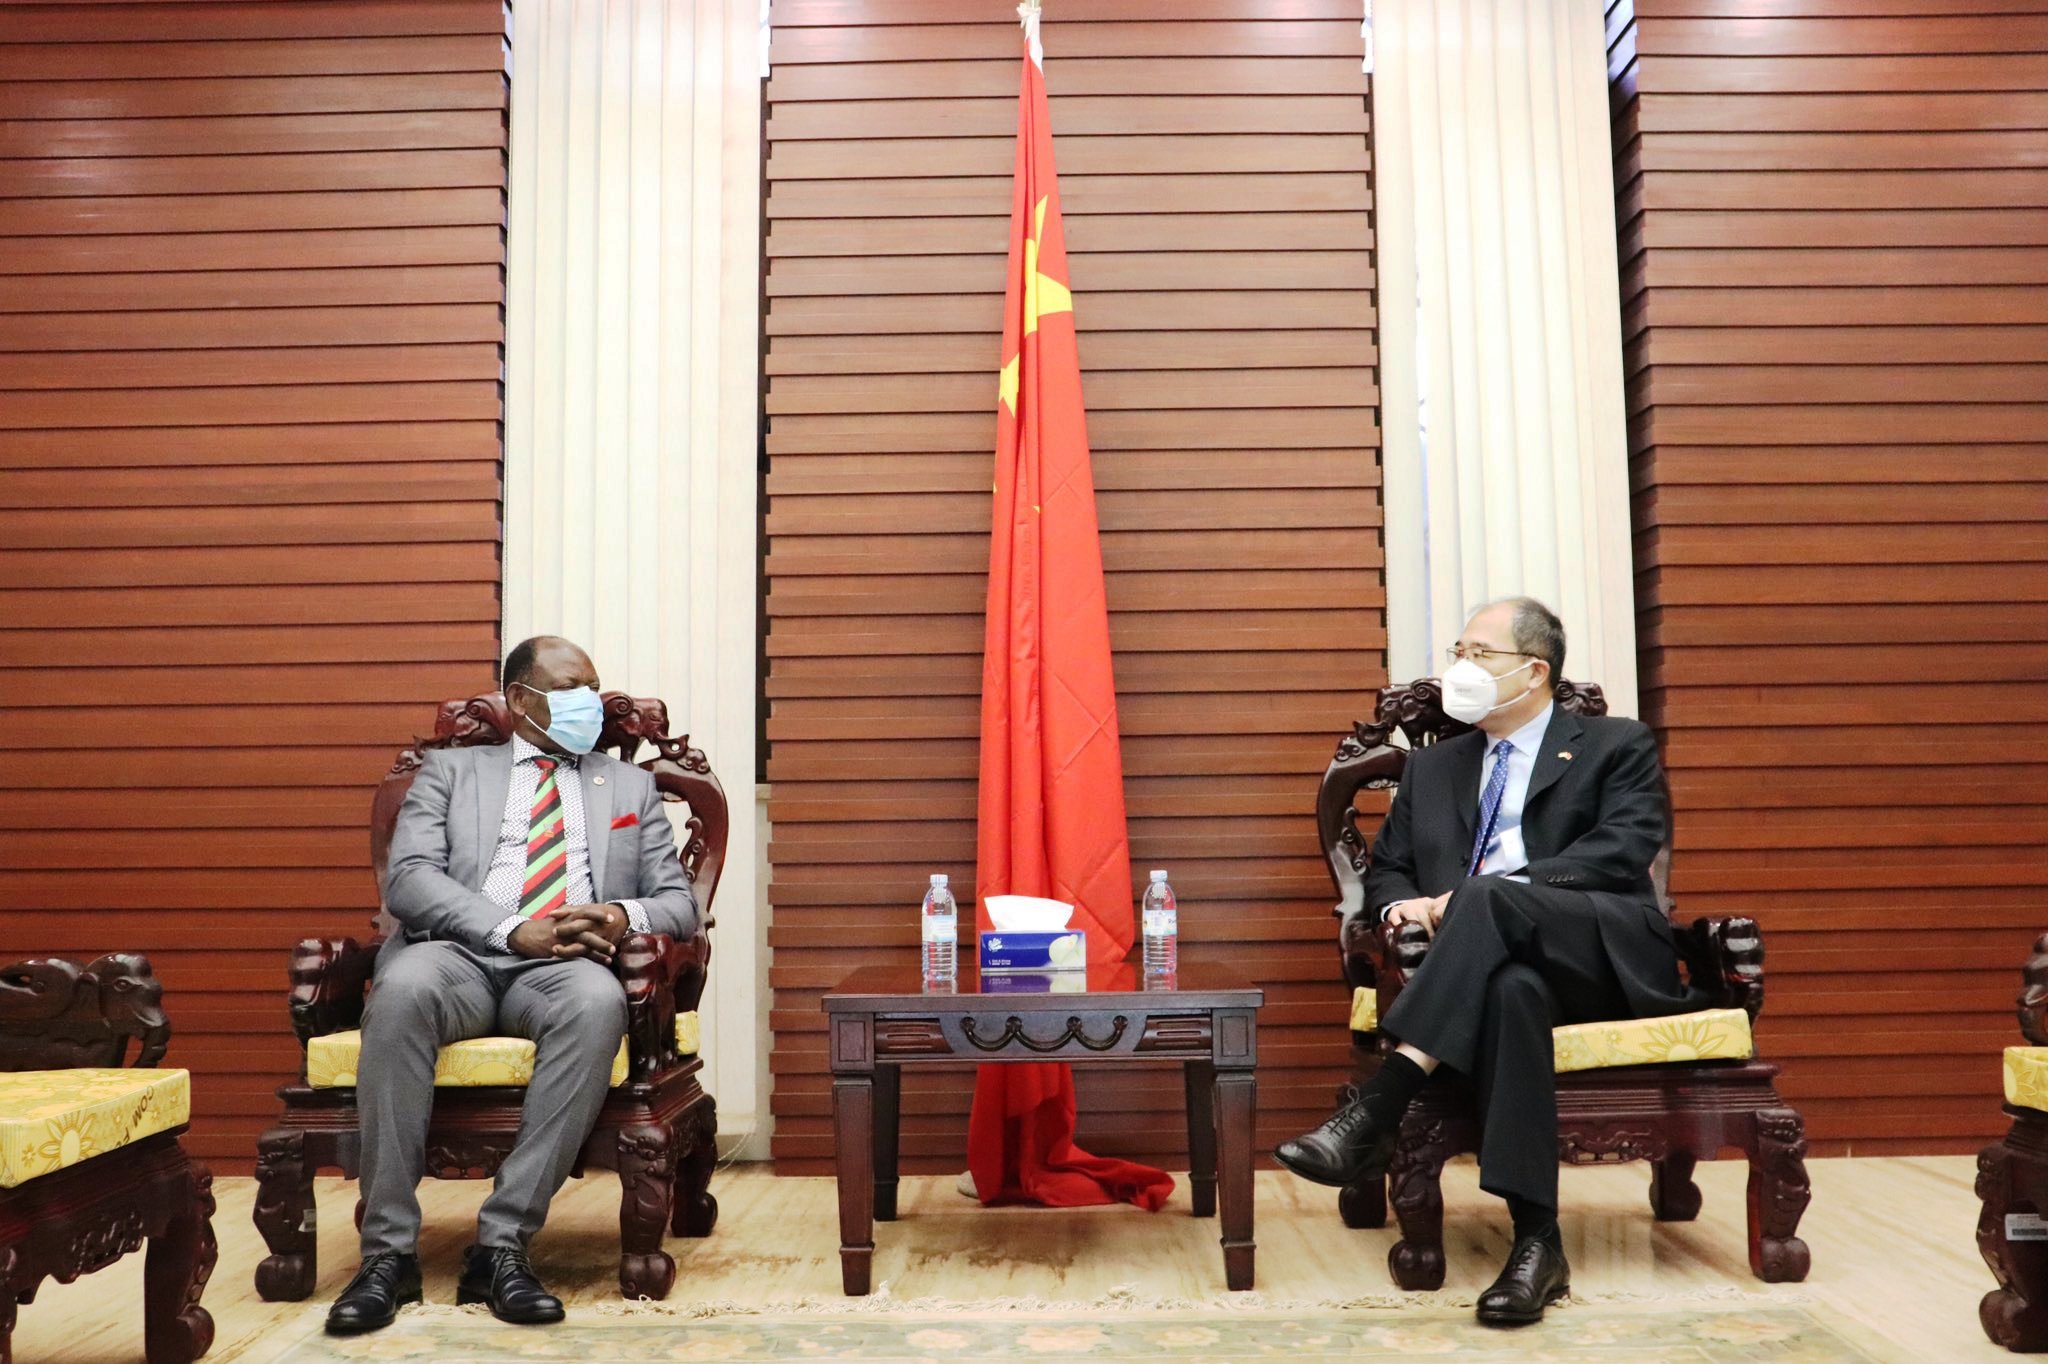 The Vice Chancellor, Prof. Barnabas Nawangwe (L) chats with his host H.E. Zheng Zhuqiang (R) during his visit to the Embassy of the People's Republic of China on 7th April 2021.